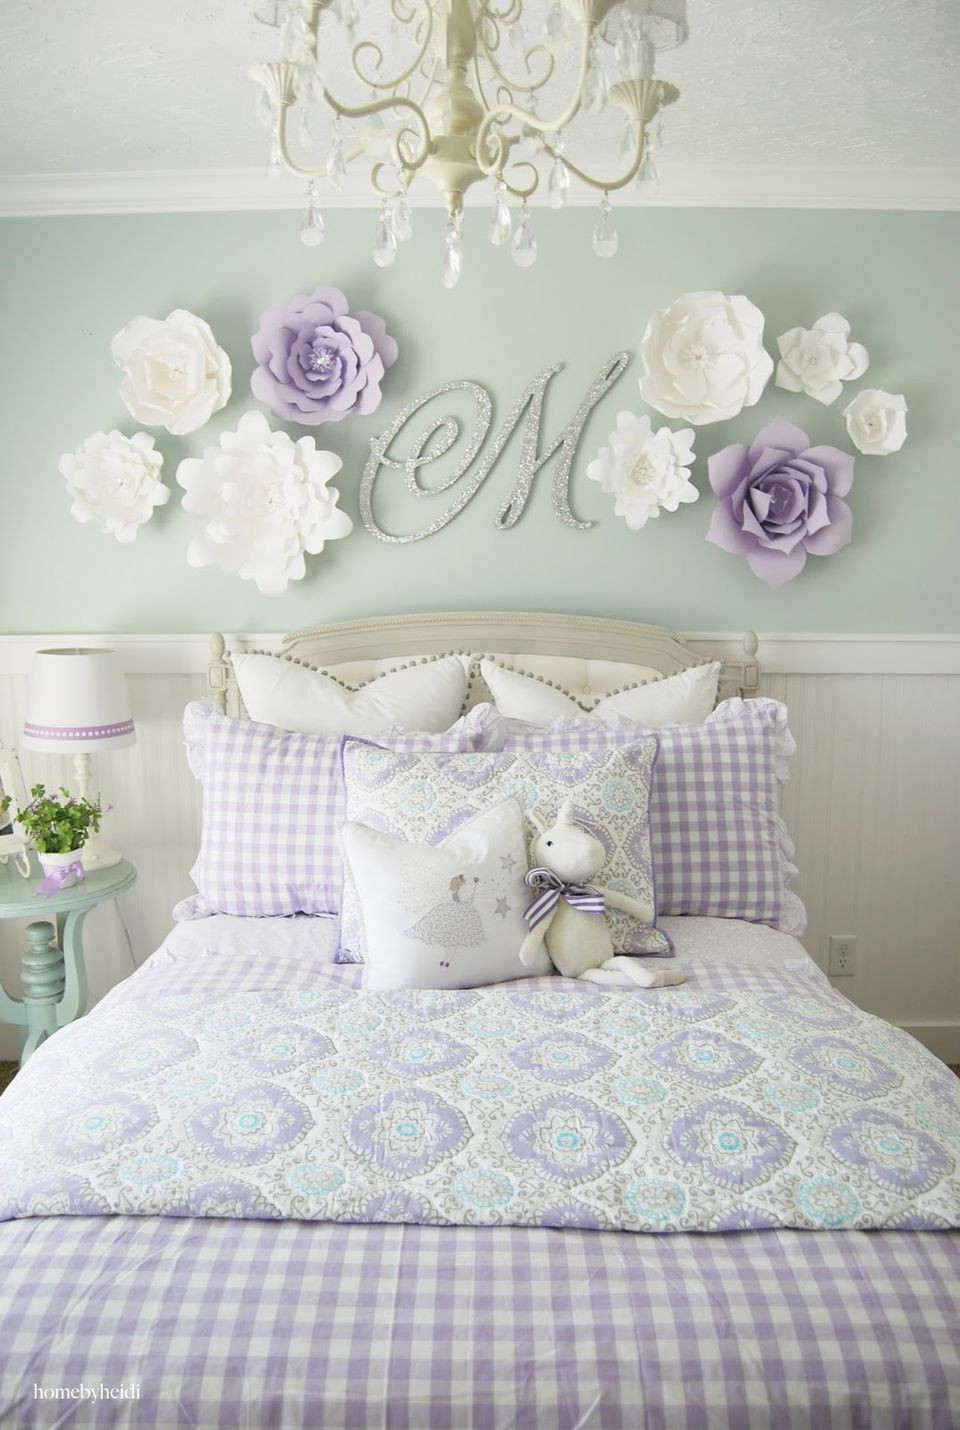 Girl Bedroom Accessories
 24 Wall Decor Ideas for Girls Rooms